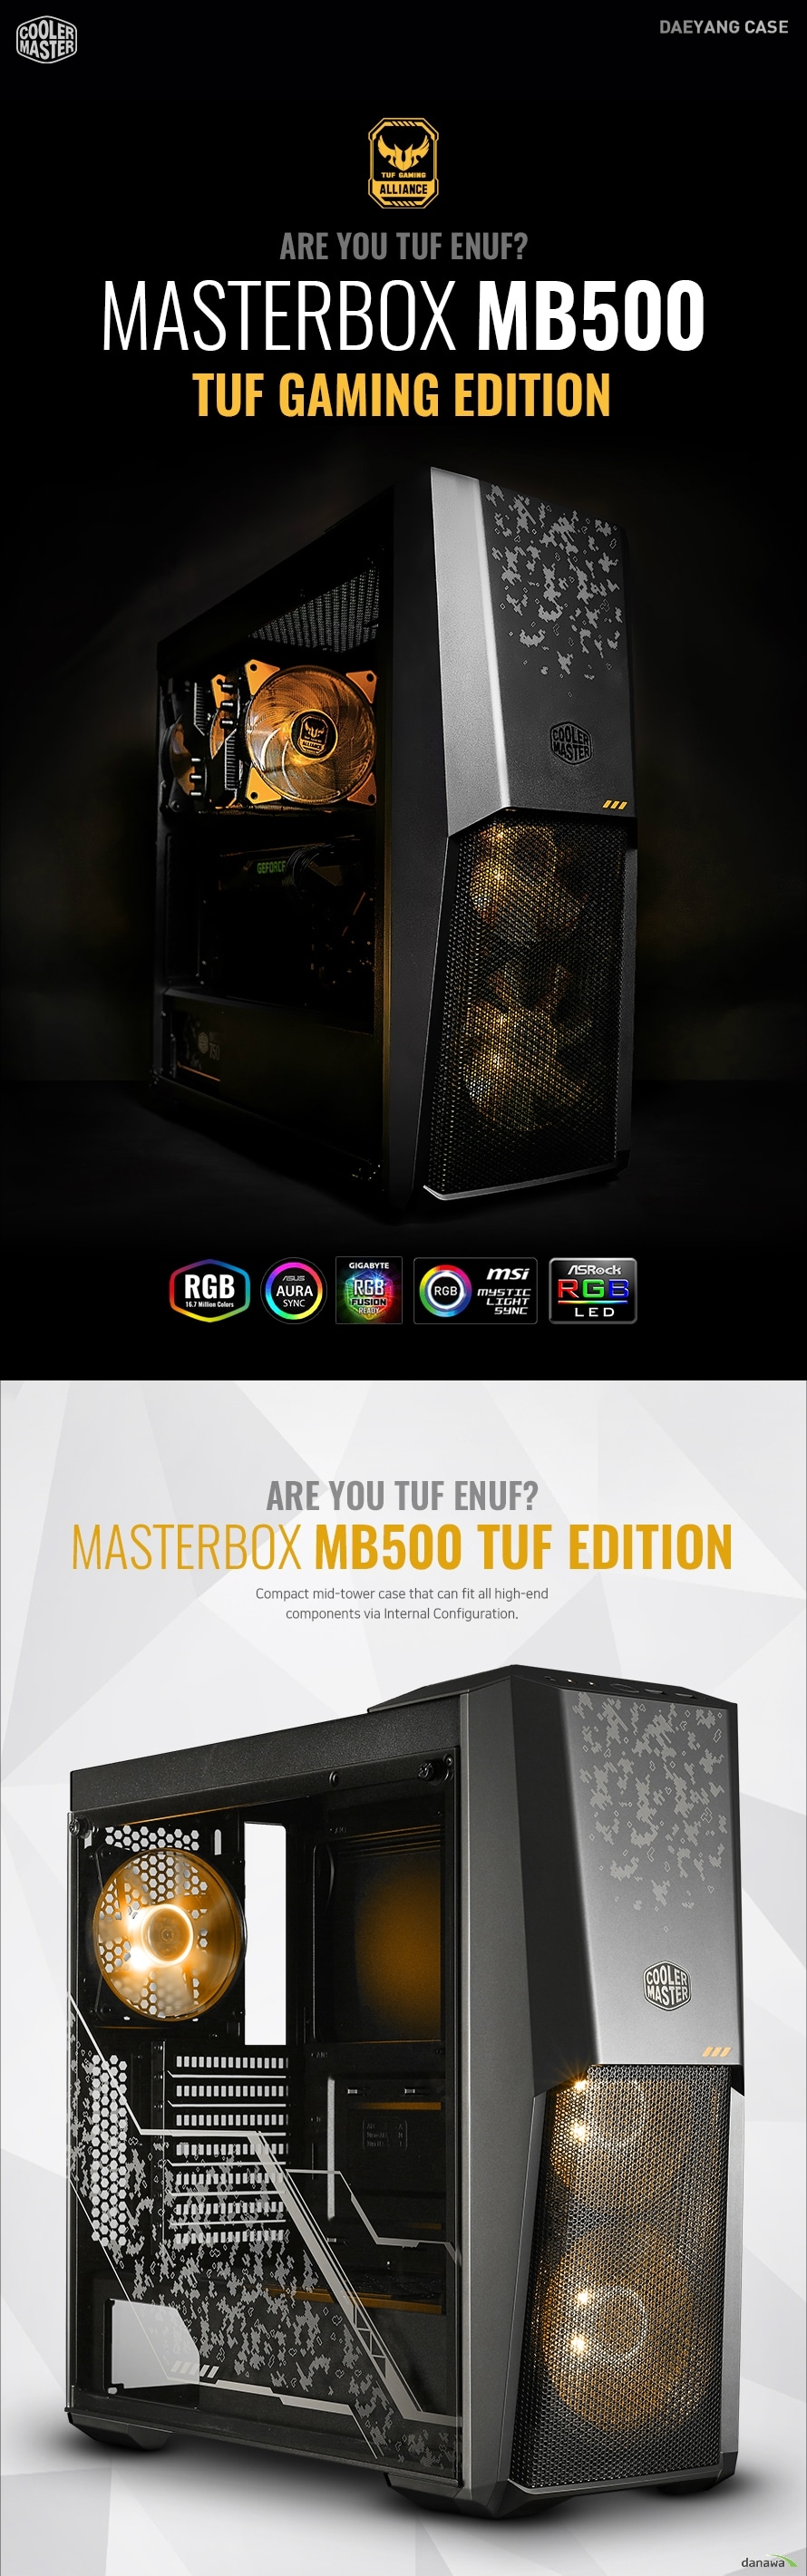 MASTERBOX MB500 TUF GAMING EDITION  𷯸 TUF ̹   ޽  гη Ź   4T β ȭ  ̵ г    120mm    ȭ ȭ  帧   ȿ شȭ RGB LED    RGB Ʈѷ ڽŸ Ŀ ÷  1 to 3 ø ̺ ⺻  Ǯ   Ŀ ö Ŀ    ְ Ǽ ڸ   𷯸 MASTERBOX MB500 TUF ΰ  , Ȯ强, ȣȯ  ̵Ÿ ̽Դϴ.    ִ Ͽ  ̾ƿ ġ Ǽ شȭϿϴ.    ȣȯ    Ÿ Ȯ强 ̵Ÿ ̽   Ƴ  ִ ǳ Ȯ强   ȿ ִ ̲½ϴ. ִ  160mm Ÿ CPU 𷯿 3 360mm ԰   CPU  ִ  400mm ׷ī ׸ 2 SSD or HDD ġ  մϴ.  ̽ ǰ ÷ִ  ̺    ˳ ĸ ̺  Ͽ  ϴ ڵ鿡  ū  մϴ. ǰ ܰ  ʴ    ̽ ϼ ǰ ϴ.  RGB LIGHTING 16.7 Million Colors RGB  Ͽ ȣϴ ÷ ׸ ŷ     4T β ȭ  г ׷  ̵ г  ȸ  ȭ  ̵ г  θ  Ͻ  ֽϴ. ܺ   ǰ ջ ְ, 縦 ּȭ Ʈ  ù̸ Ͽϴ.   RGB ȭ   120mm   ⺻  鿡 120mm ũ ֵ RGB ÷ LED   ġϿ  RGB Ŀ Ʃ 带 մϴ.  RGB Ʈѷ   ư ۸  LED ÷   ֽϴ.  ϰ RGB   RGB  RESET ġ  ϰ   ֽϴ.  ϳ Ʈ 3 RGB LED   1 to 3 rgb ø ̺ ⺻  𷯸 RGB  ҿ ȭ 1 to 3 ø ̺Դϴ.  580mm ̸   4 RGB   ȣȯ˴ϴ.  ȭ  帧   ȿ  ý  鿡 120mm  2 ĸ鿡 120mm  Ͽϴ.  ʿ   ġ  帧 Ȱϵ Ͽ  ϴ Ŀ ö, ϵ  Ŀ  ȿ  ϴ.  Product NameProduct Name Product NumberProduct Number Available ColorAvailable Color MaterialsMaterials Dimensions (LxWxH)Dimensions (LxWxH) Motherboard SupportMotherboard Support Expansion SlotsExpansion Slots Drive BaysDrive Bays I/O PortI/O Port Pre-installed Fan(s)Pre-installed Fan(s)  Fan SupportFan Support   Radiator SupportRadiator Support  ClearancesClearances   Cable RoutingCable Routing Dust FiltersDust Filters Power Supply SupportPower Supply Support  CoolerMaster GLOBAL NO.1 𷯸  𷯸 A/S ó  ȳ  1. ǰ  A/S û  ǰ ڵ ȣ Ǵ ų ʼ 2. A/S Ⱓ  ҷ  ǰ شϴ ǰ  1:1 ȯ  3. ǰ   Ƿ    ļ õ  ǰ ջ  A/S  å ʽϴ. 4. ǰ ⺻   A/S Ұ ϸ   ǰ A/S  5. 𷯸 A/S   񽺰 Ǹ    ǰ   ֽϴ. 6. ǰ   Ʈ  Ÿ μǰ, ڻ ǰ  ǰ ս 翡 å ʽϴ. 7. A/S Ⱓ  ǰ 1:1 ȯ  ۺ(պ)  ()̽ δϴ   (ù ̿ Ÿ ù ̿  Կ ݵ˴ϴ.)  A/S û  ʽ ׸ ڵ尡   A/S  å  ʽϴ.   𷯸 ǰ  𷯸 ѹα     ()̽Դϴ. 𷯸  ǰ  Կ ()̽  񽺸   ֽϴ. 𷯸 ǰ   ڽ  ǰ ο ø ƼĿ  ȮϽñ ٶϴ. ()̽   ǰ ƴ ǰ A/S   ϴ.  ѹα  Կ DAEYANG CASE ֽȸ ̽  